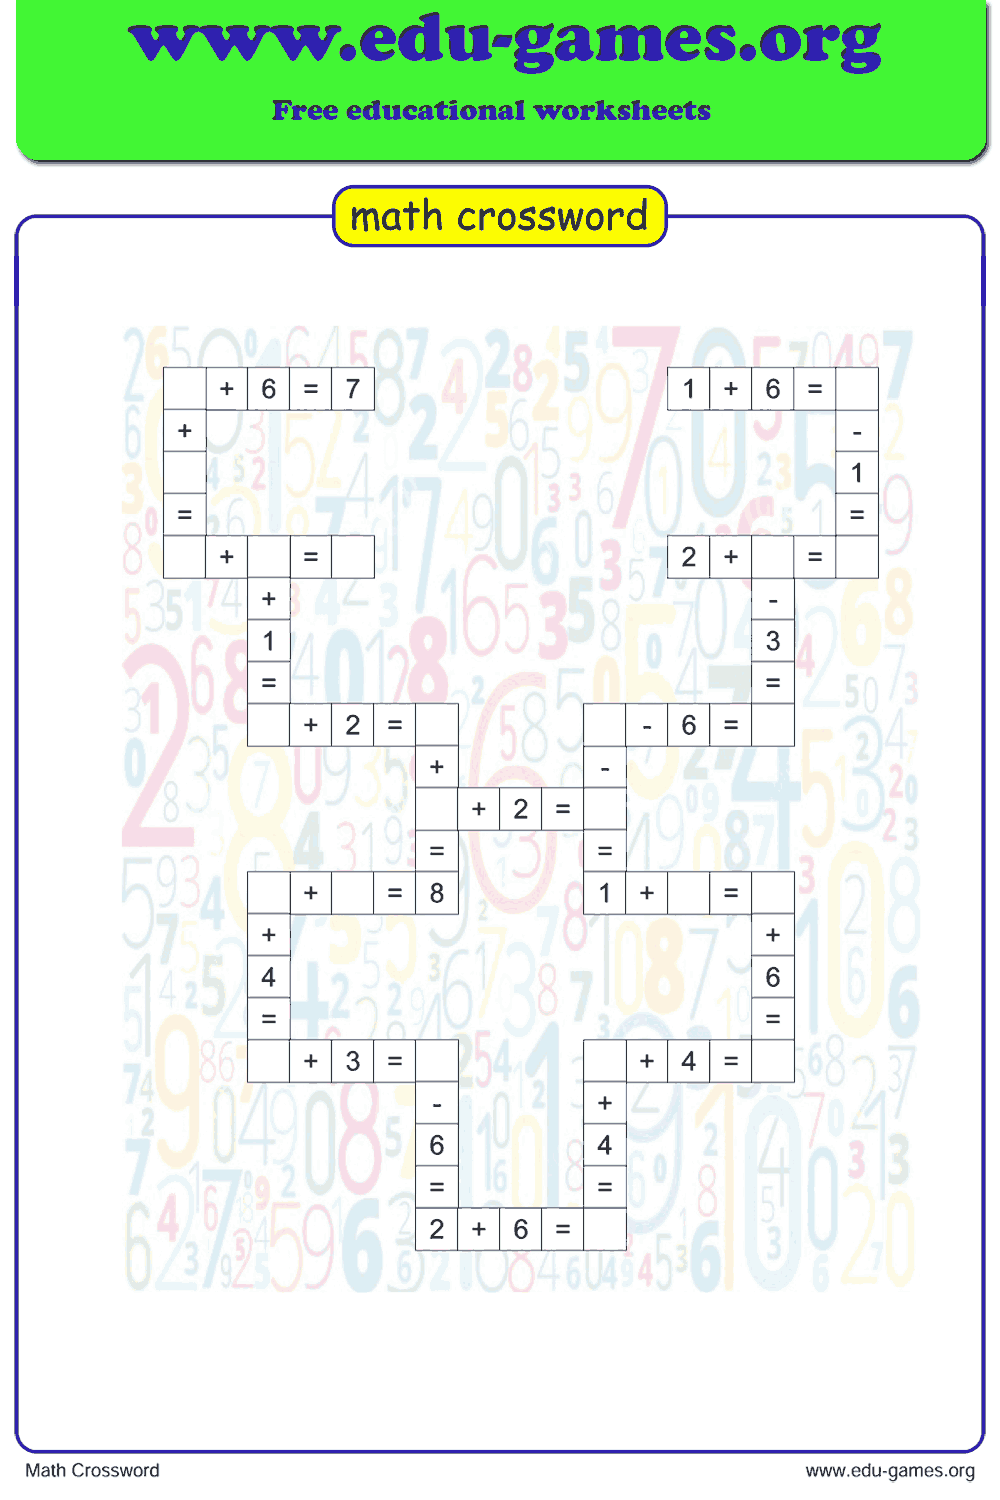 Free Tagalog Crossword Puzzle Printable